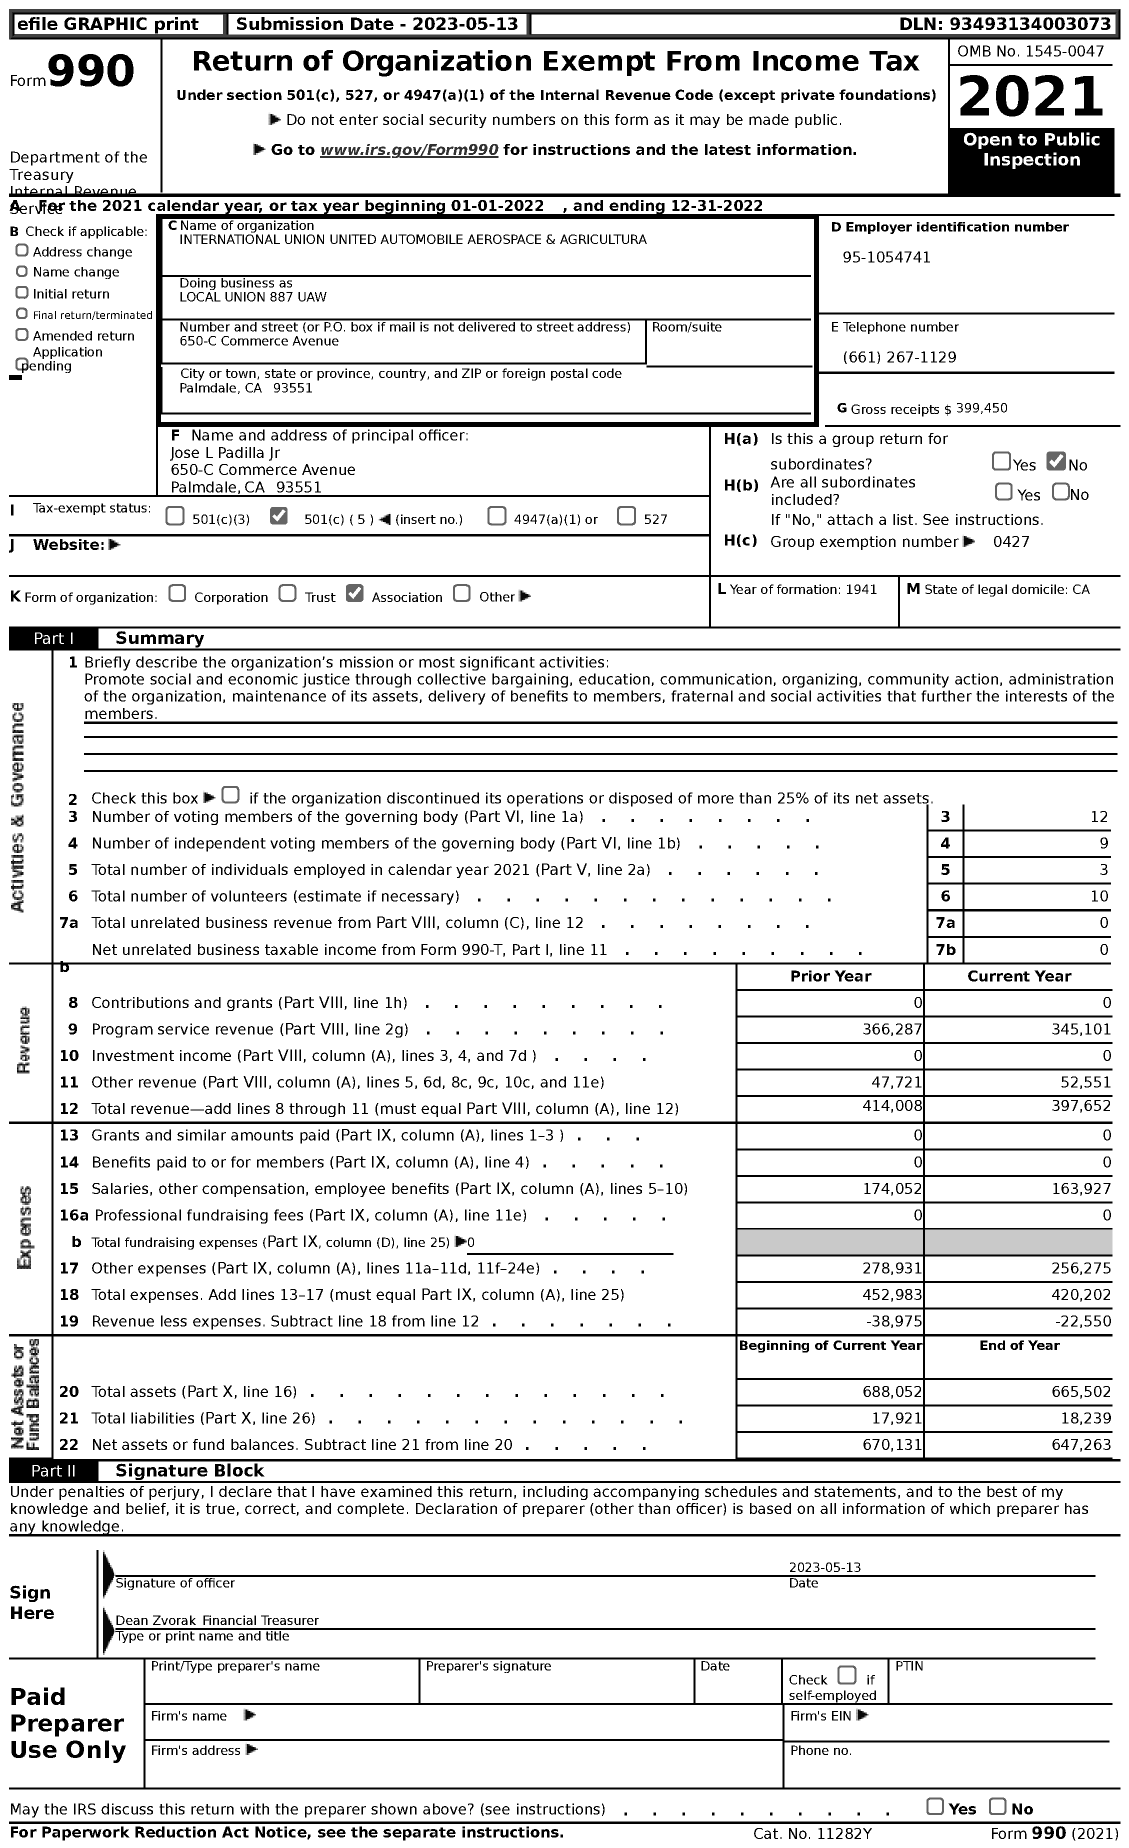 Image of first page of 2022 Form 990 for Uaw - Local Union 887 Uaw